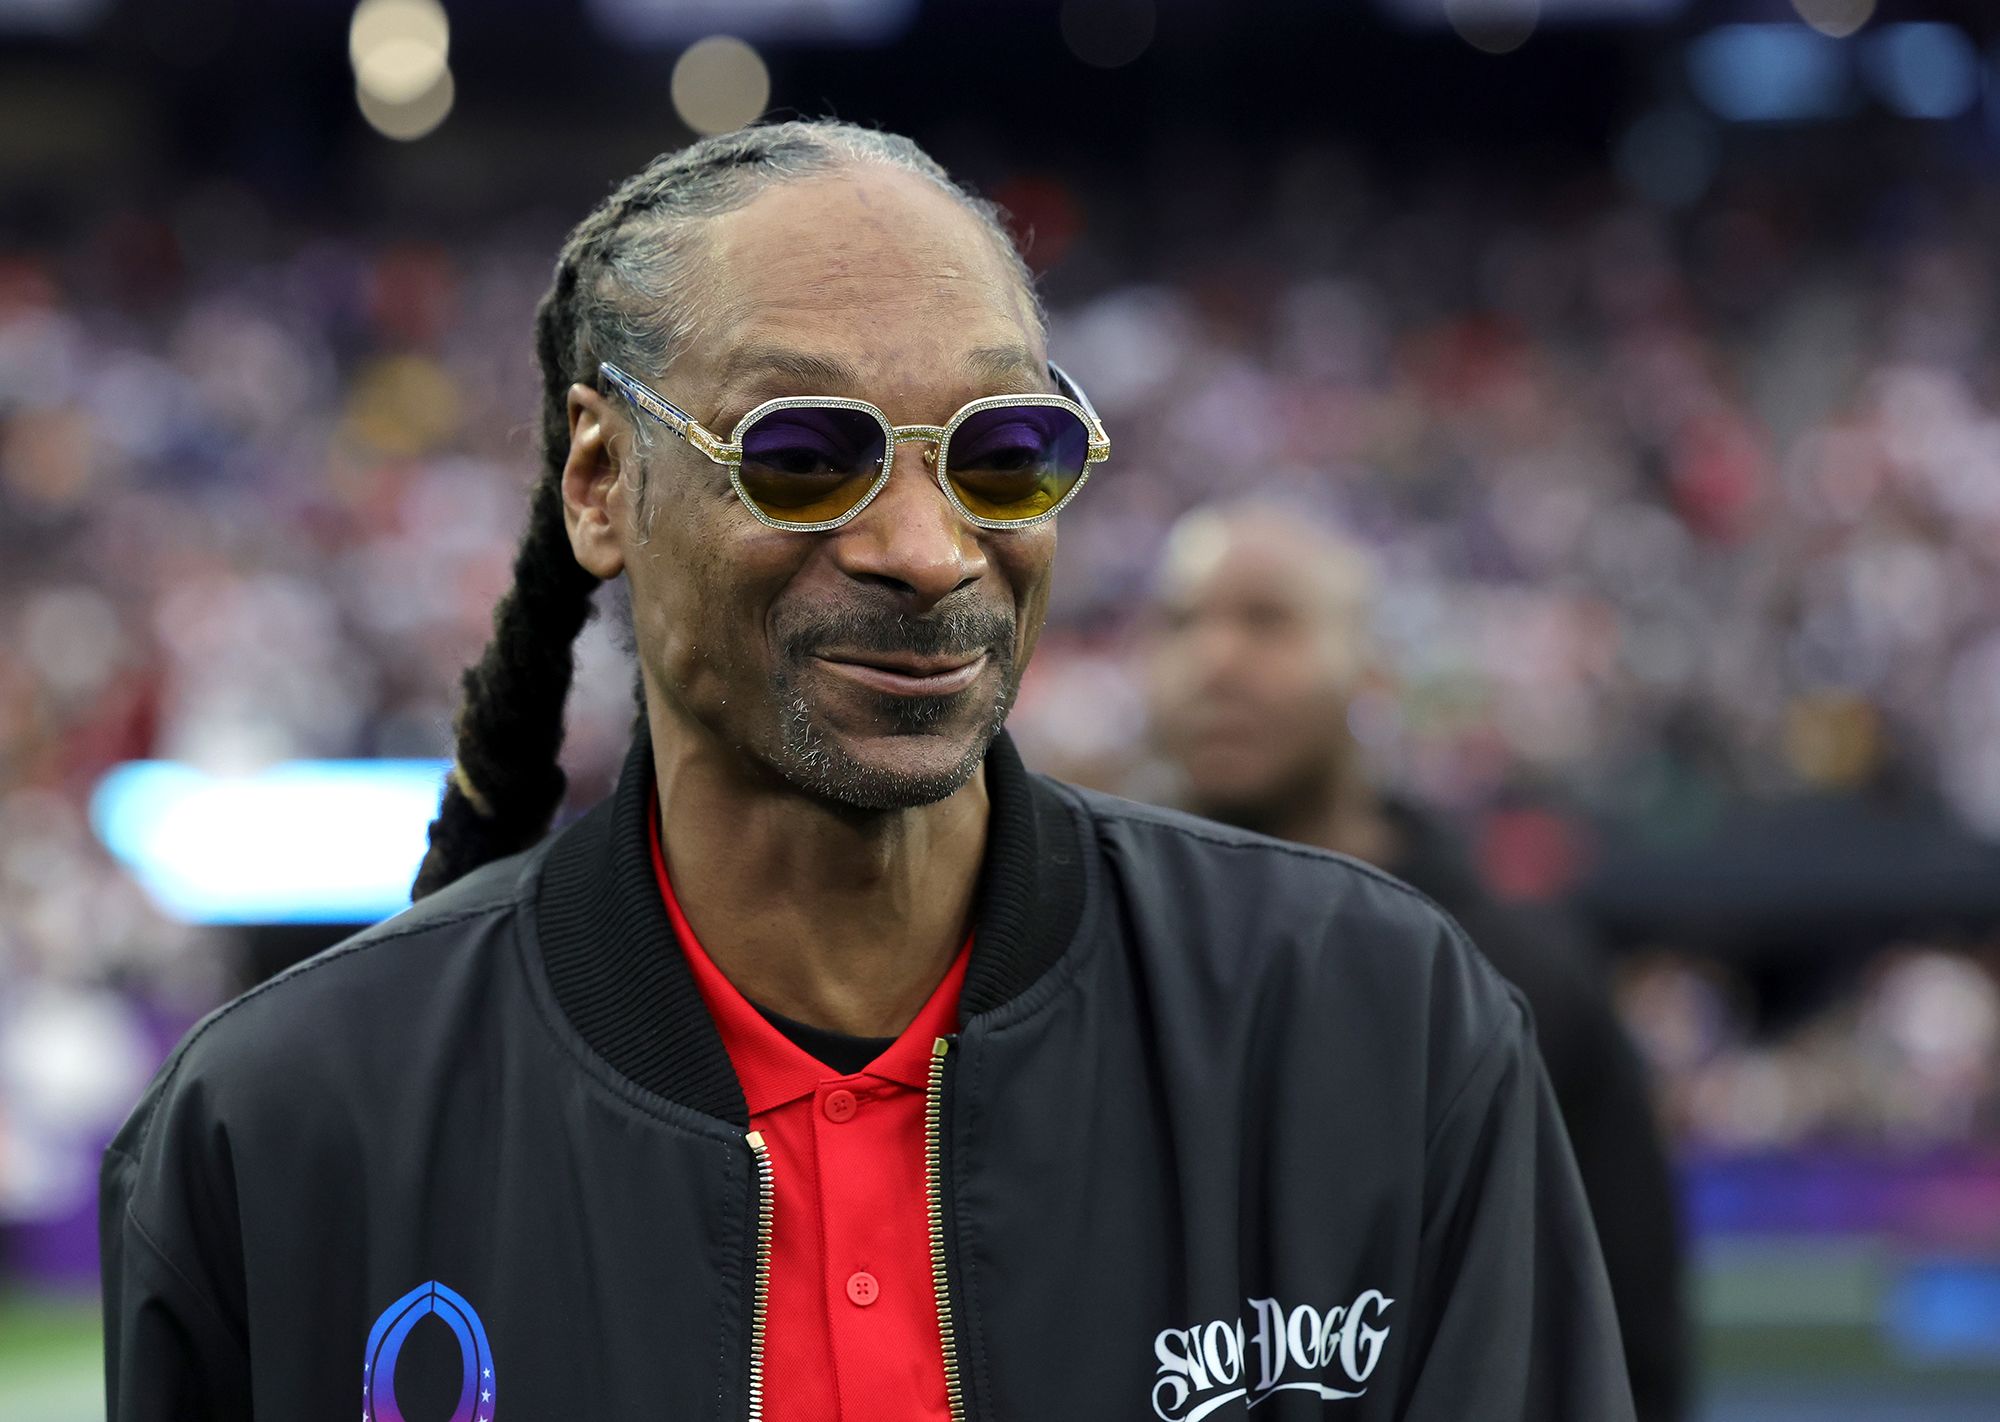 Snoop Dogg launches new coffee line INDOxyz inspired by trip to Indonesia